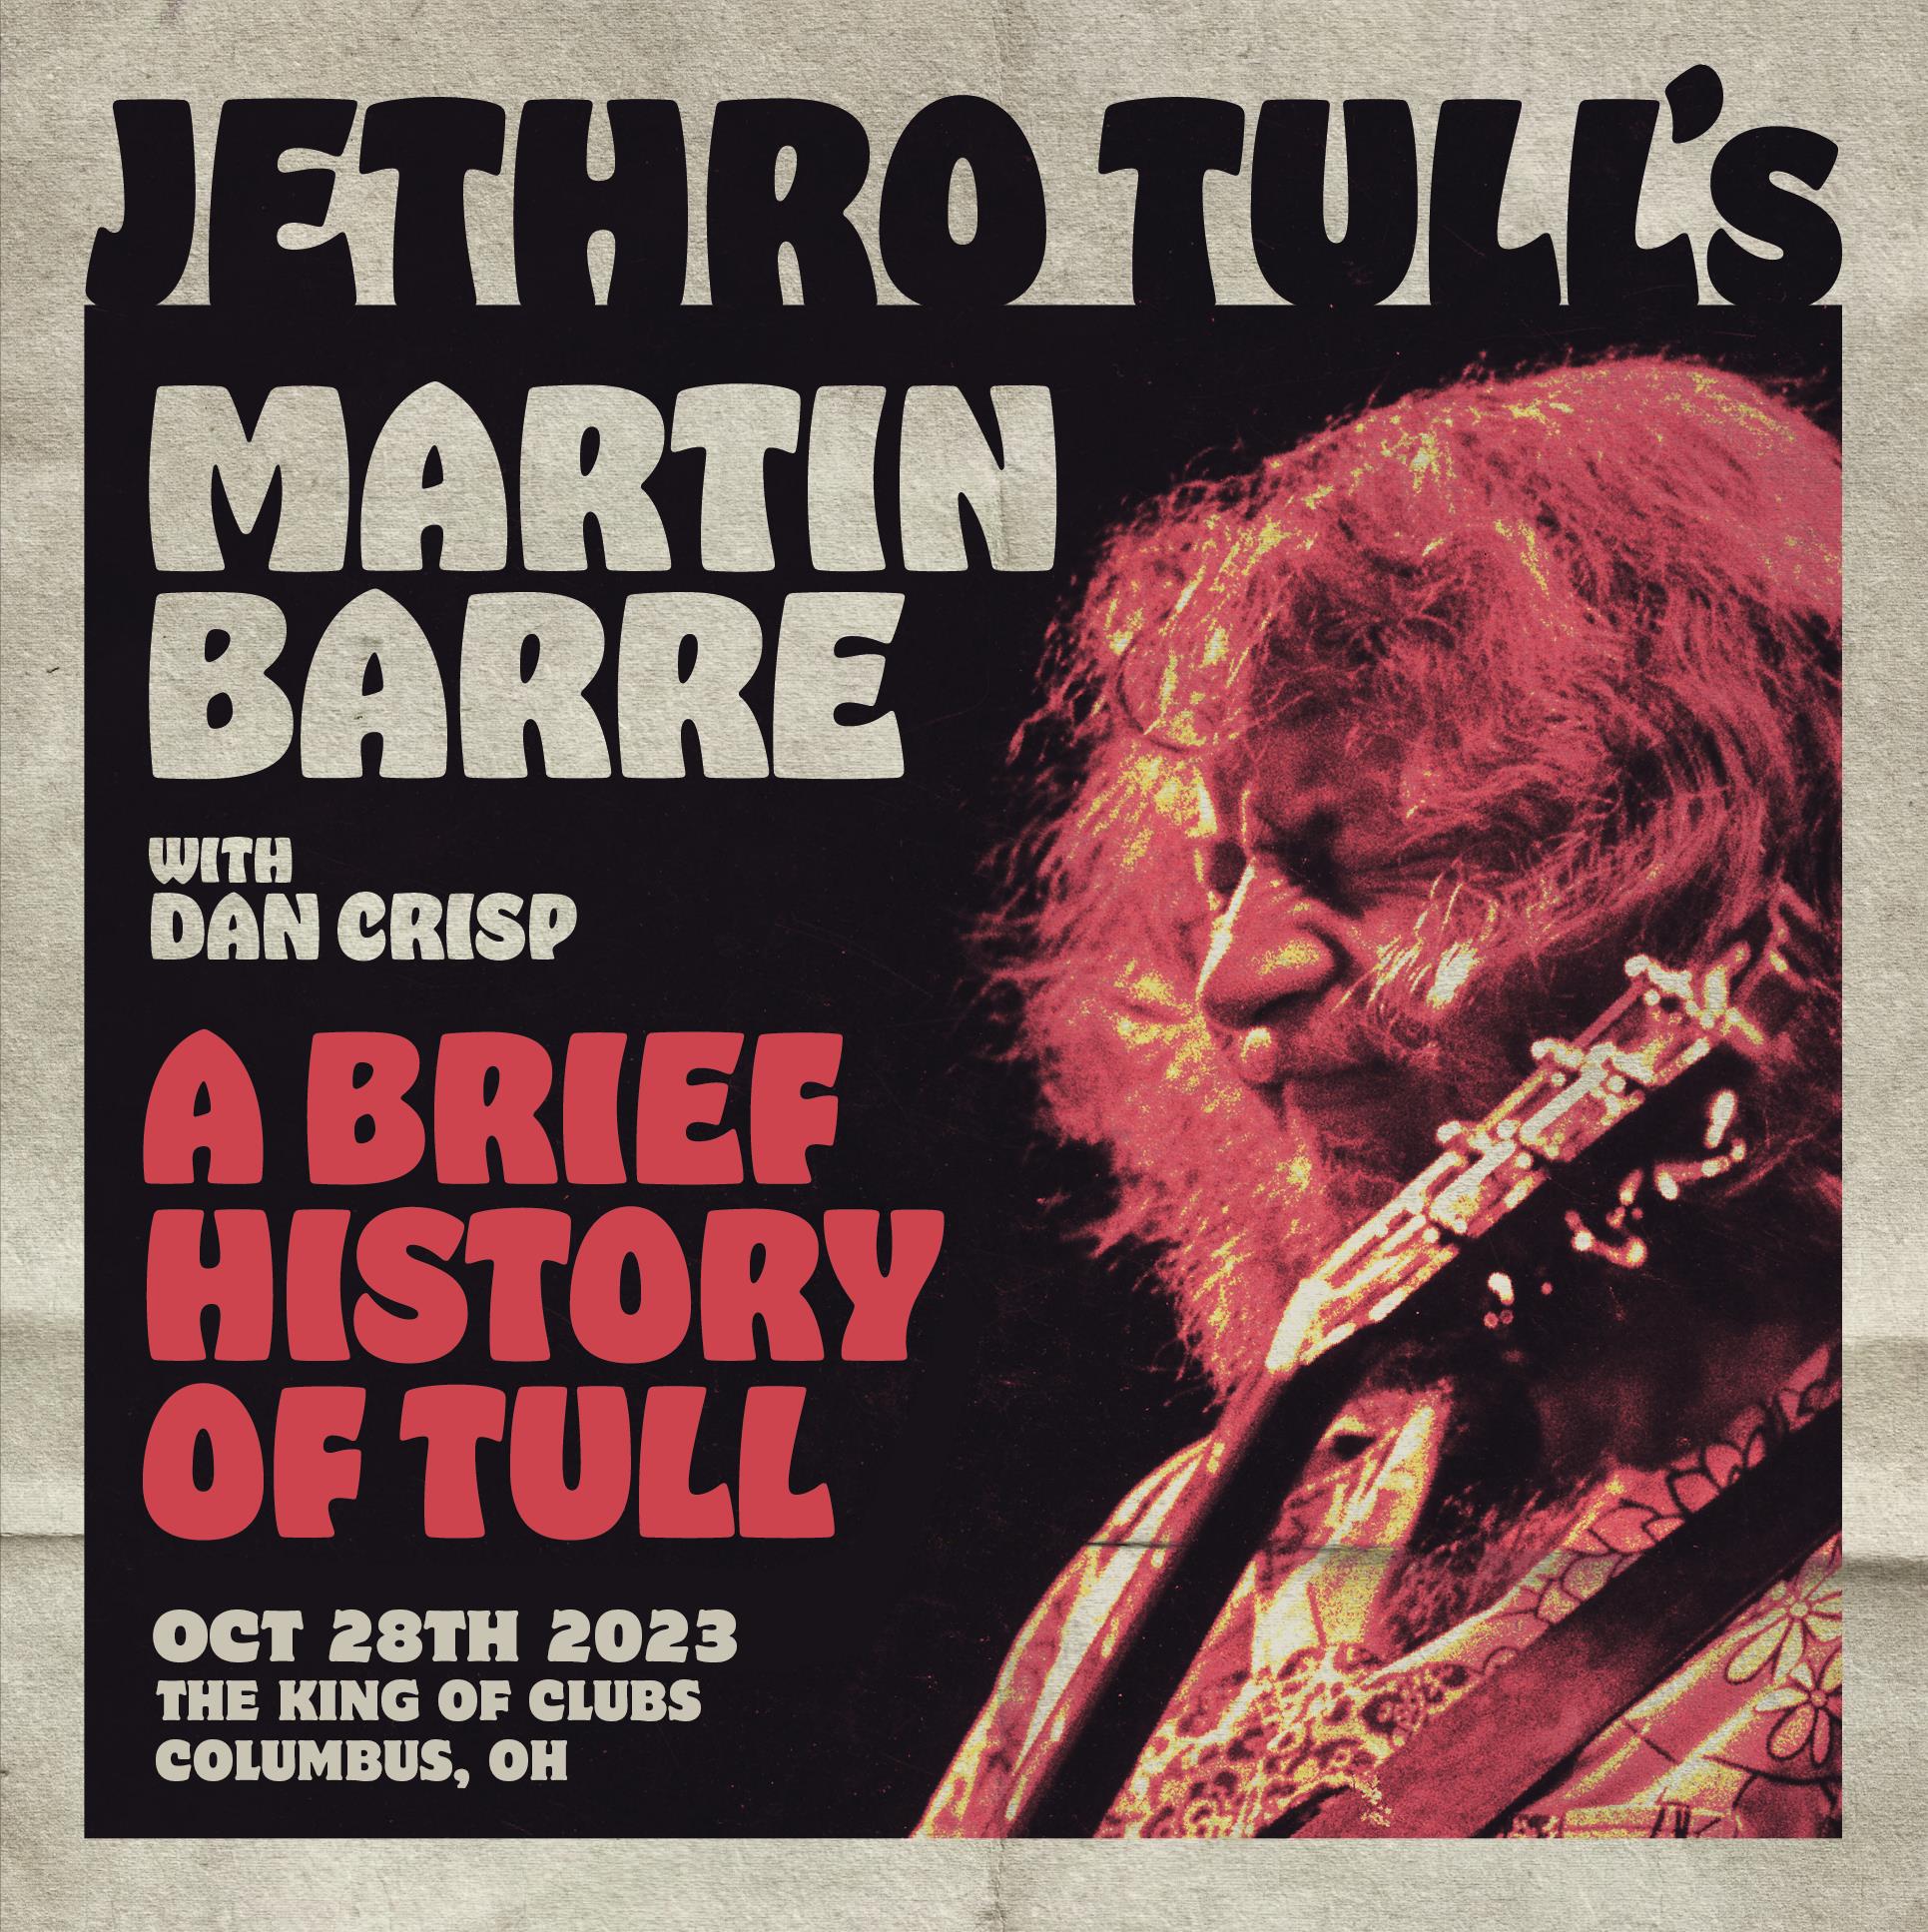 Buy Tickets to Cancelled Jethro Tull’s Martin Barre in Columbus on Oct